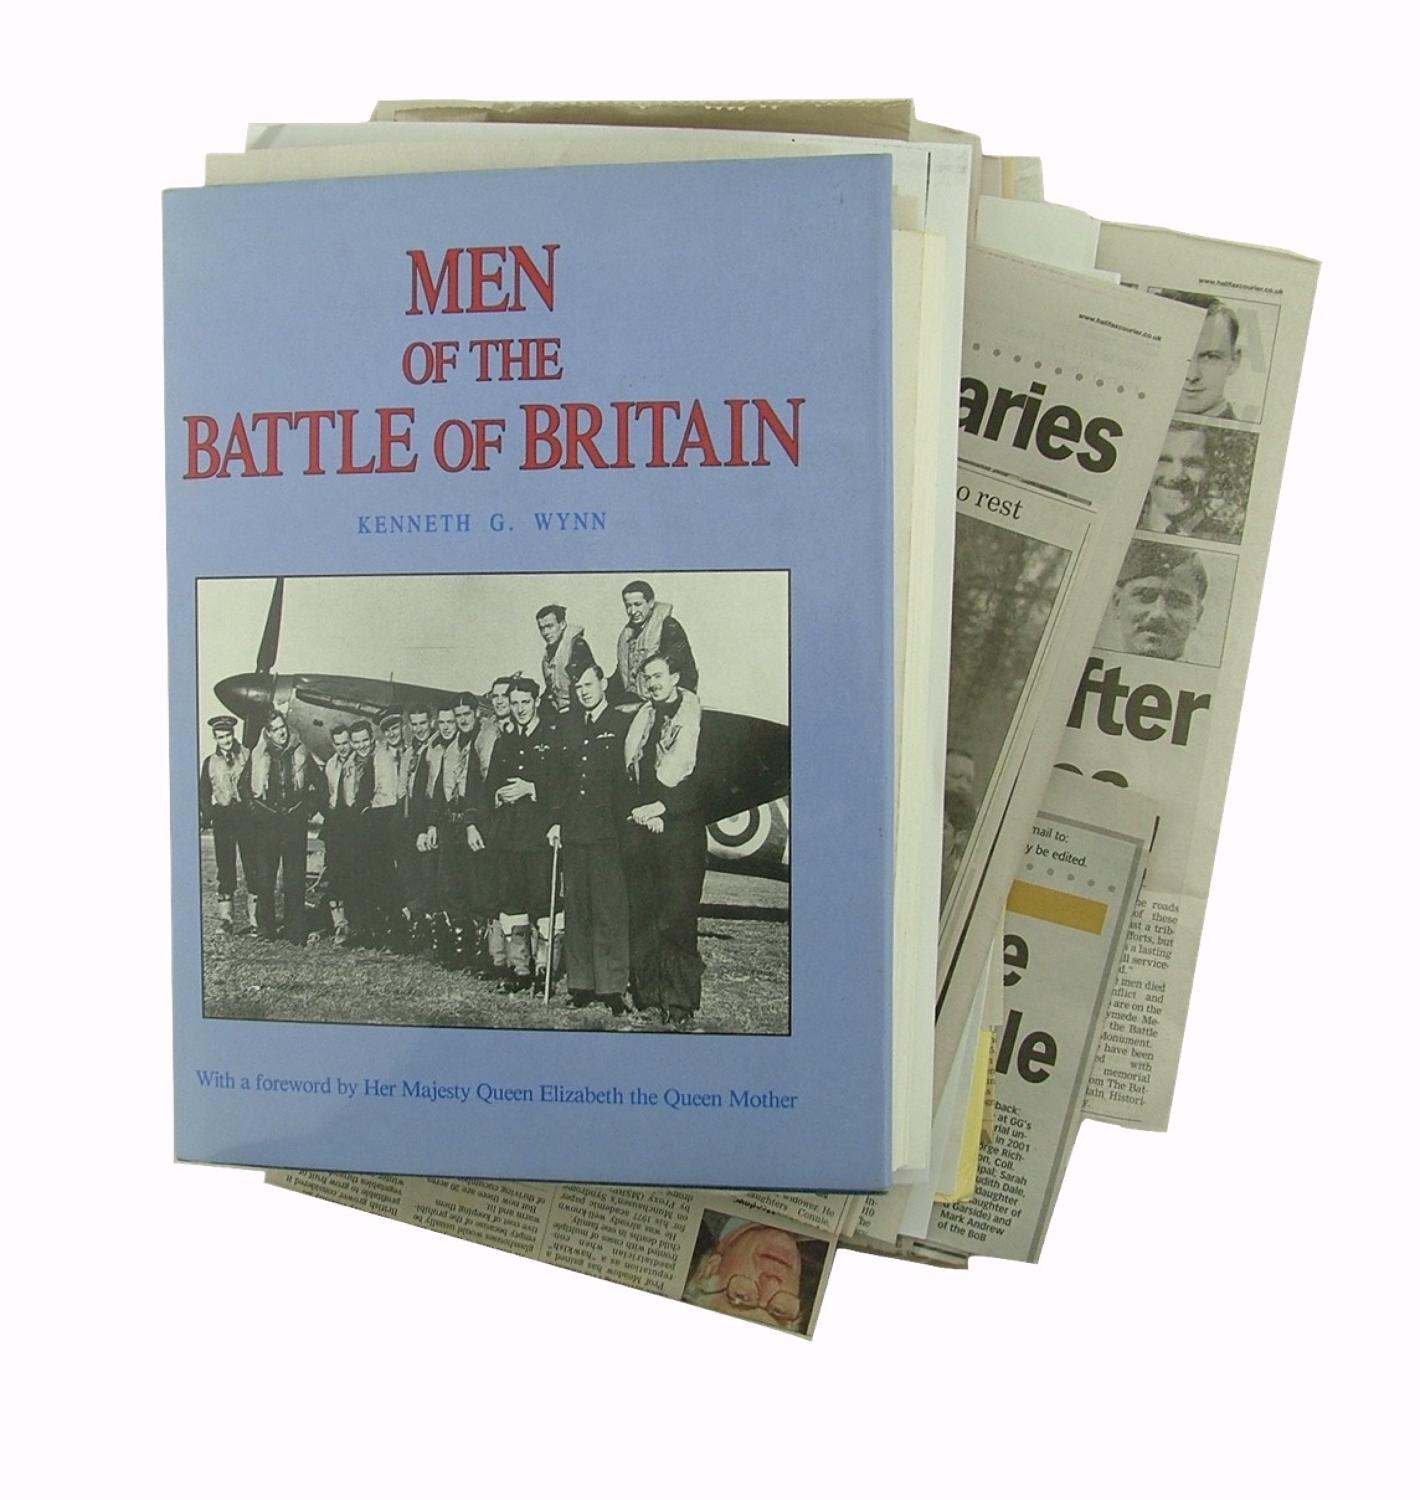 Men of the Battle of Britain & clippings